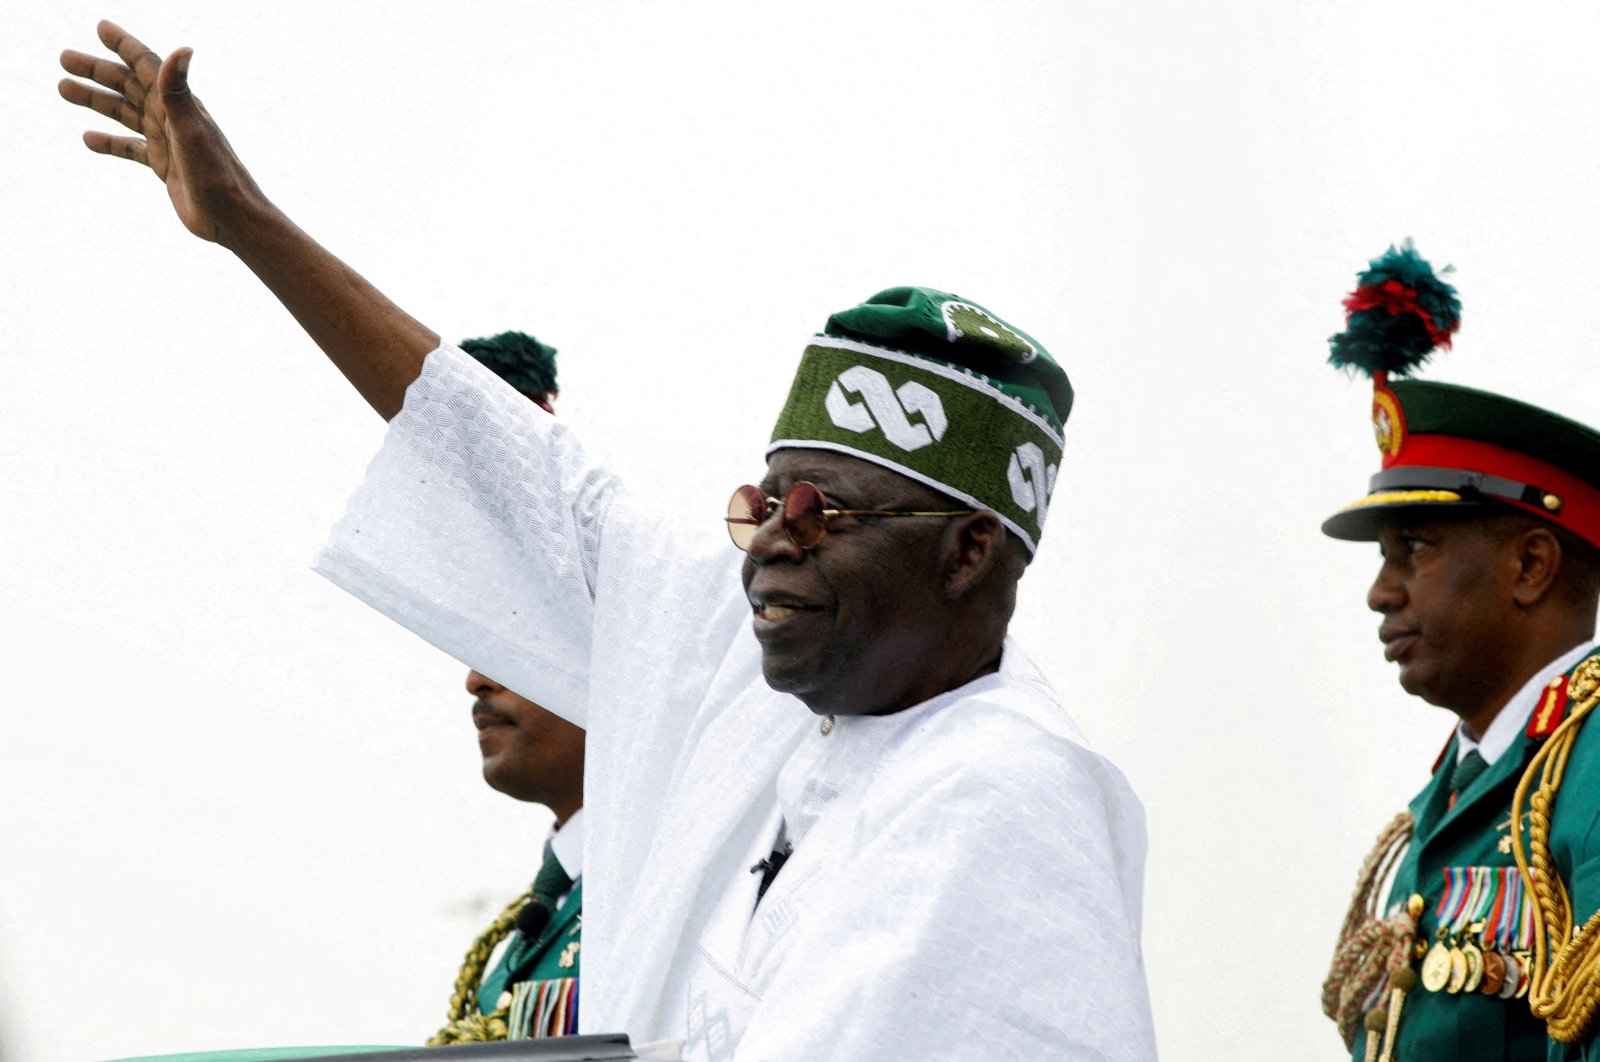 Nigeria&#039;s President Bola Tinubu waves to a crowd as he takes the traditional ride on top of a ceremonial vehicle, after his swearing-in ceremony in Abuja, Nigeria, May 29, 2023. (Reuters Photo)